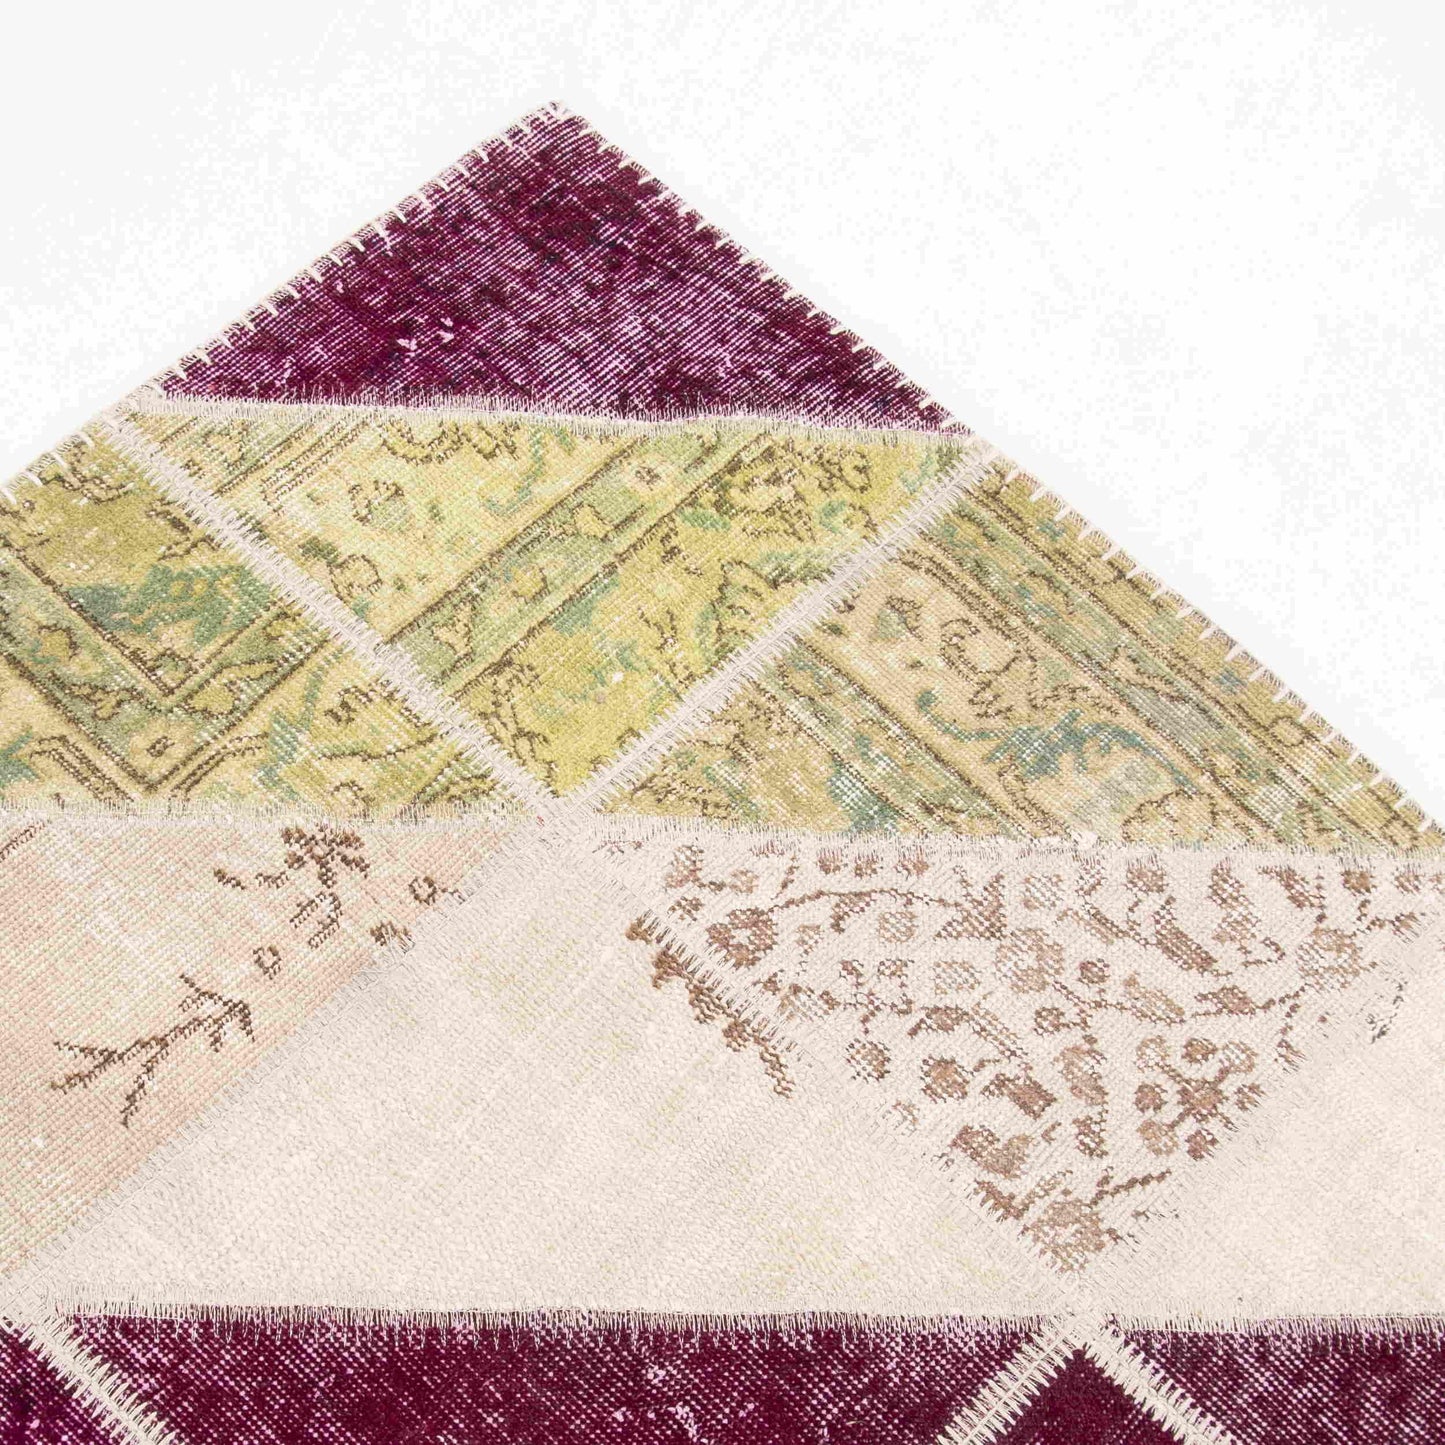 Oriental Rug Patchwork Hand Knotted Wool On Wool 118 x 200 Cm - 3' 11'' x 6' 7'' Multicolor C016 ER01